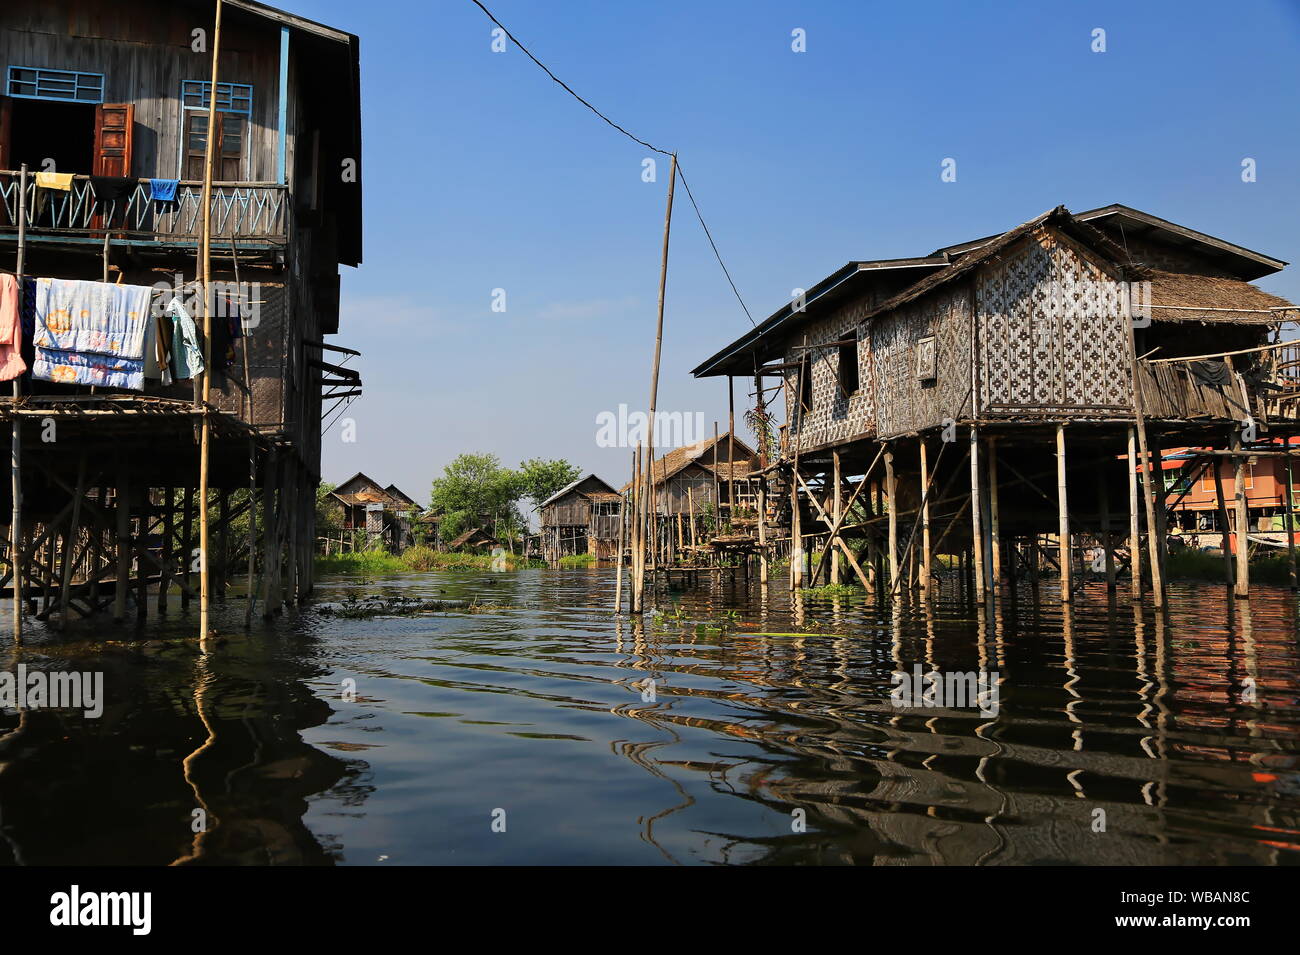 Houses on the Inle Lake in Myanmar Stock Photo